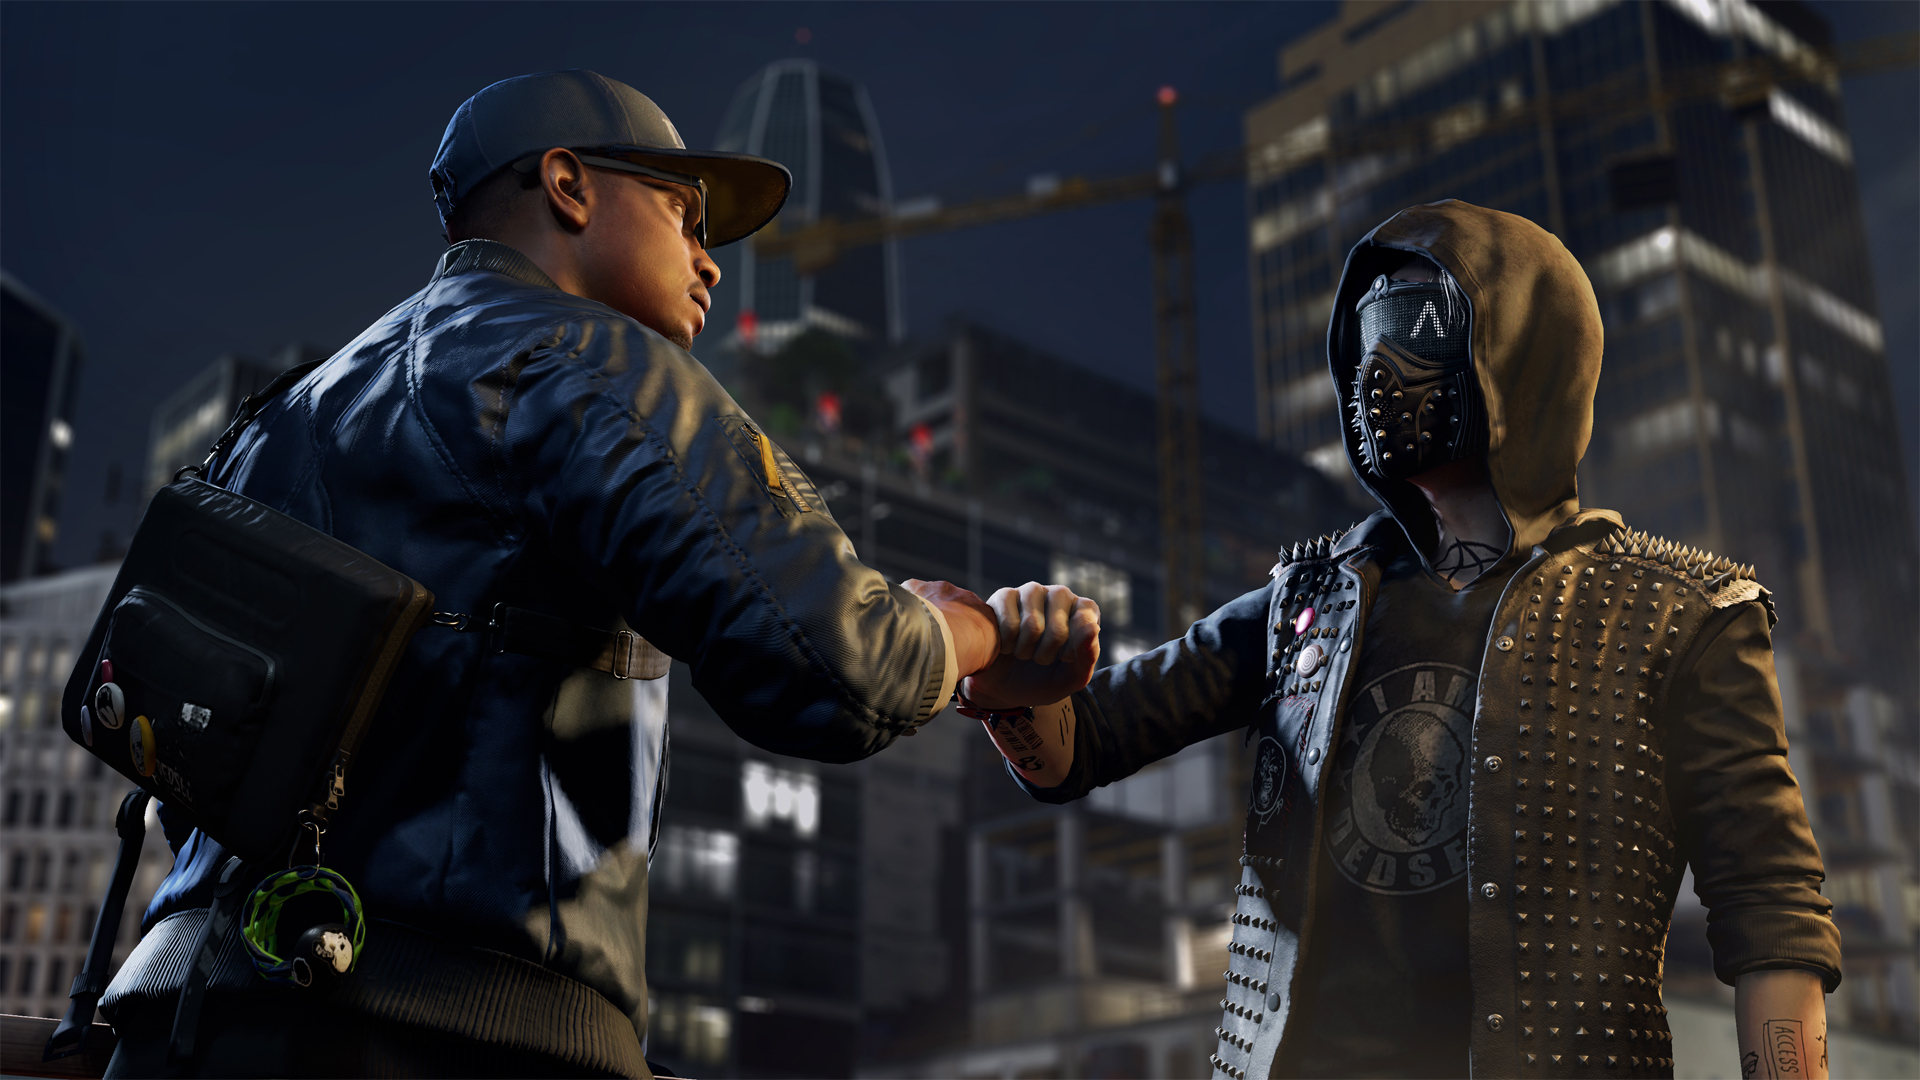 Marcus shares a moment with Wrench (whose outfit I hope to cosplay someday). (Image: Ubisoft)